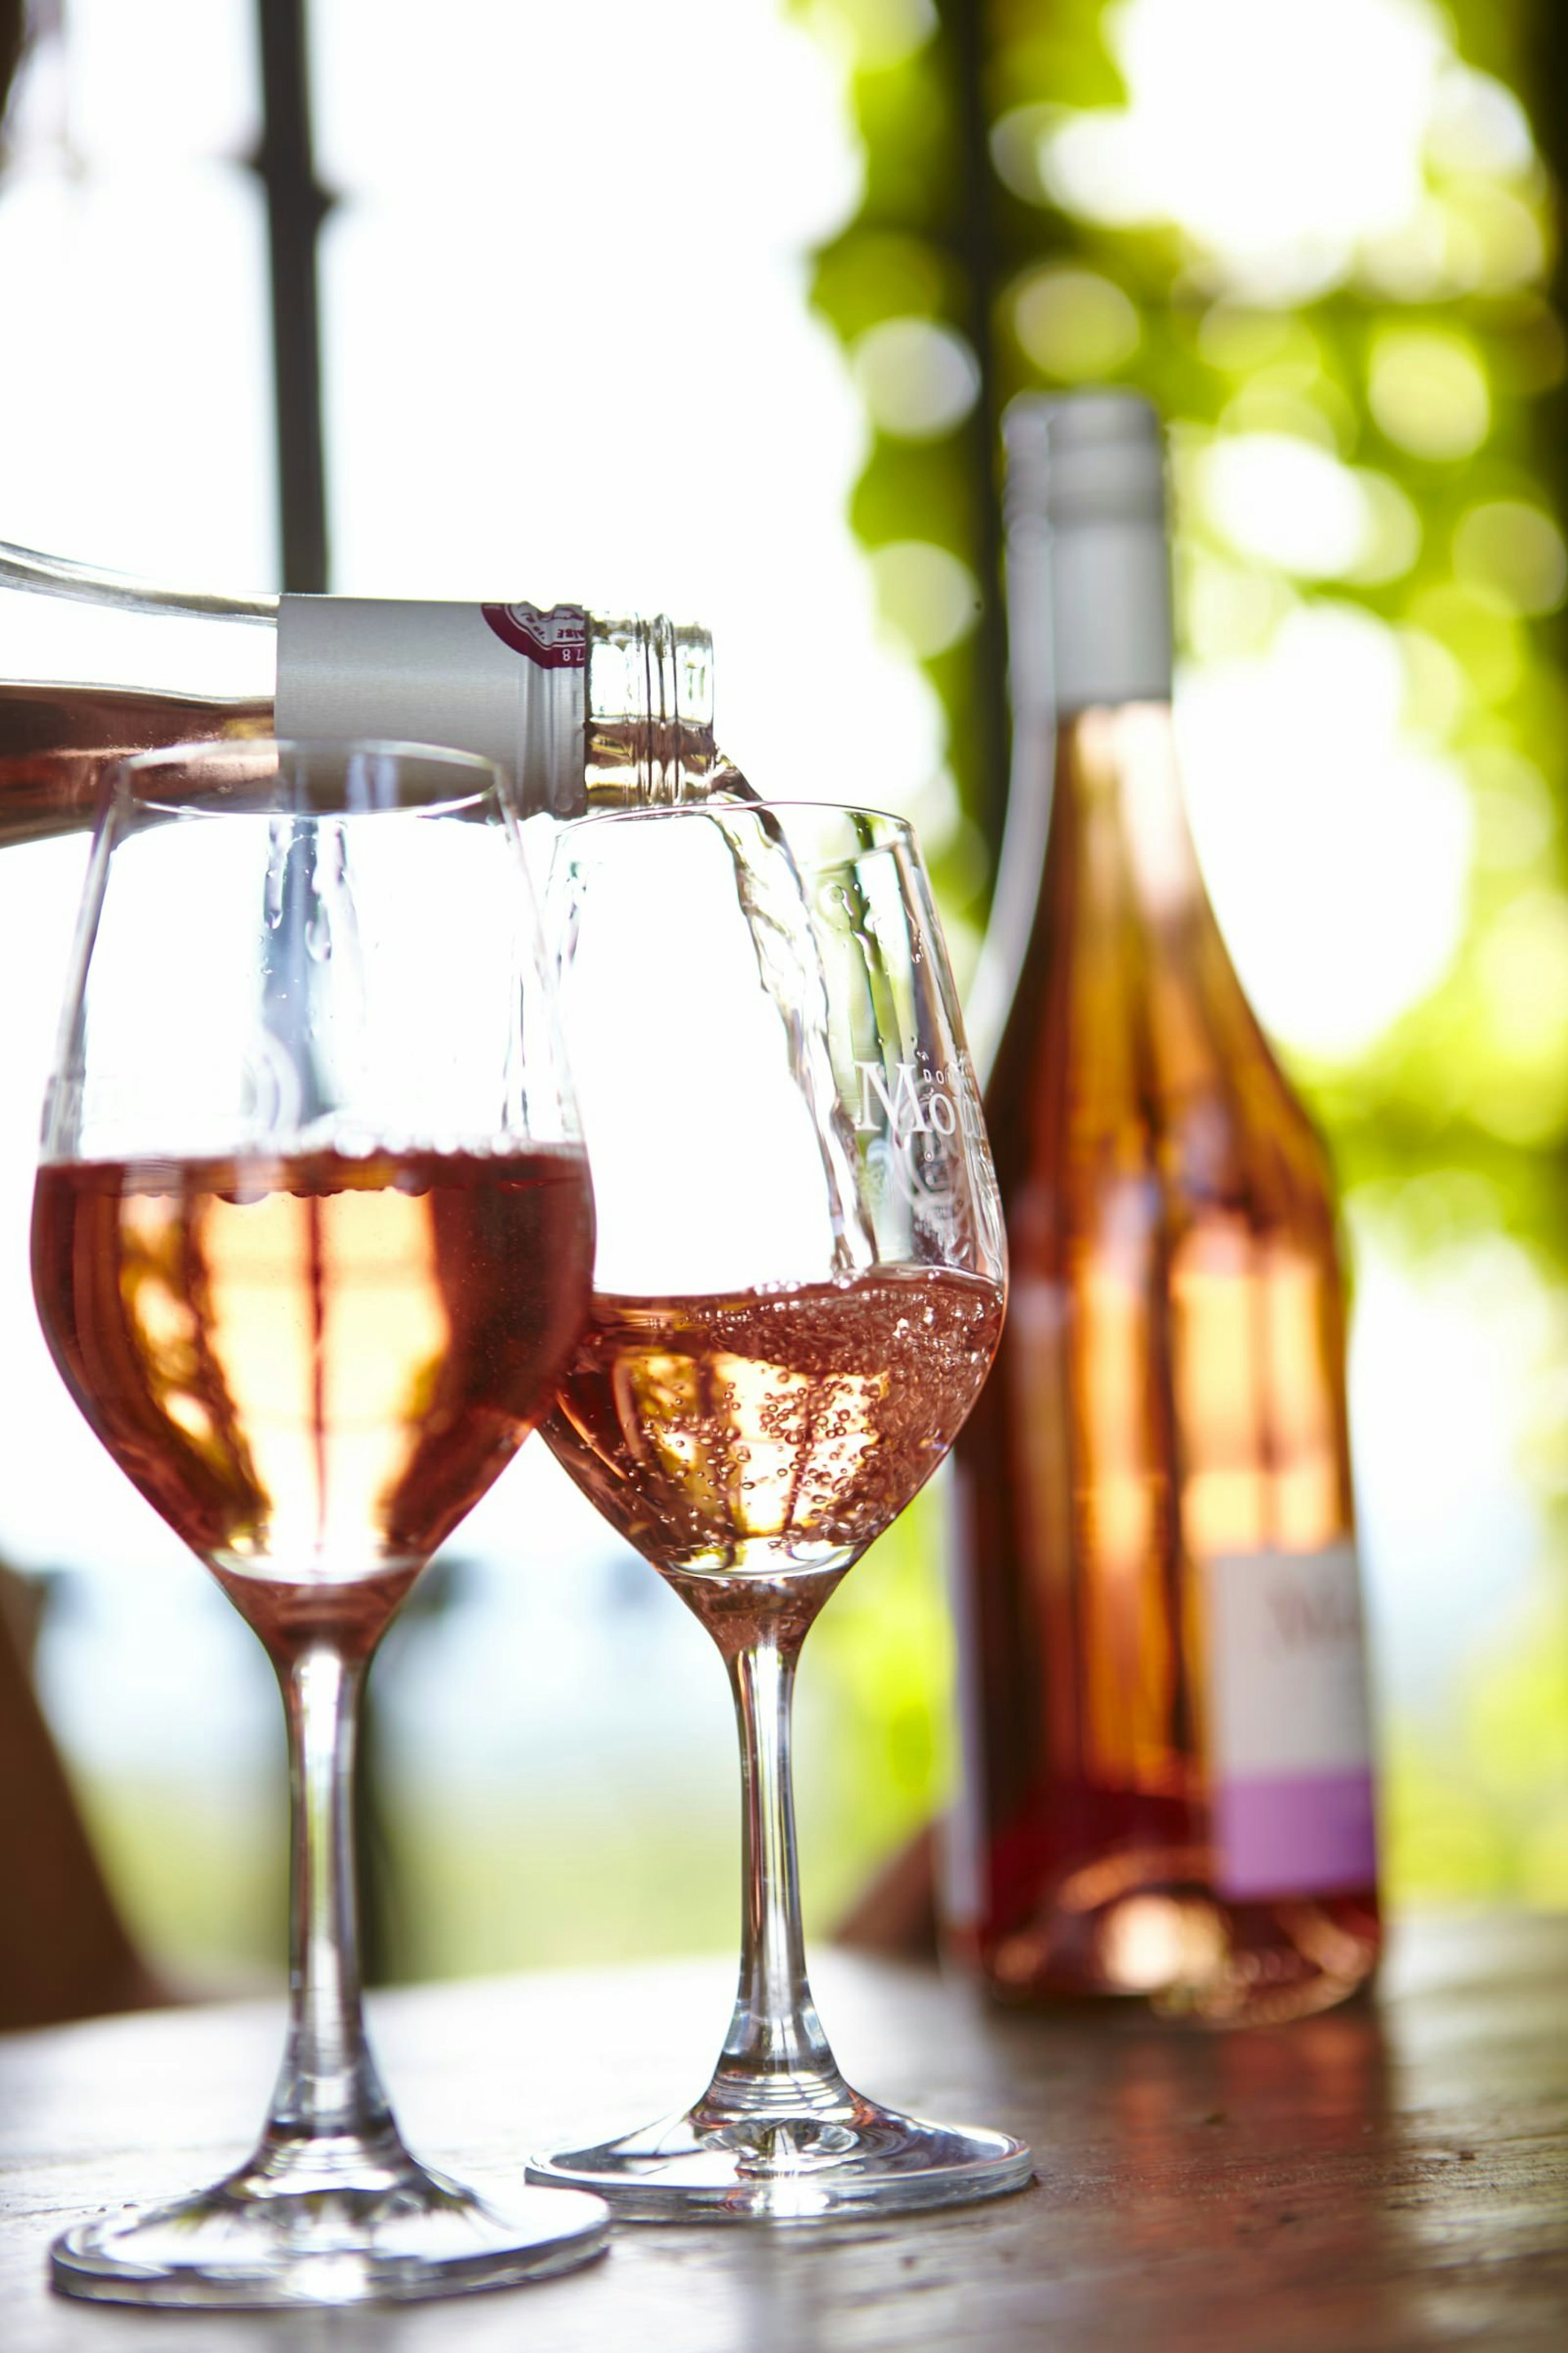 Glasses of Domaine de Mourchon rosé being poured at a Provence vineyard